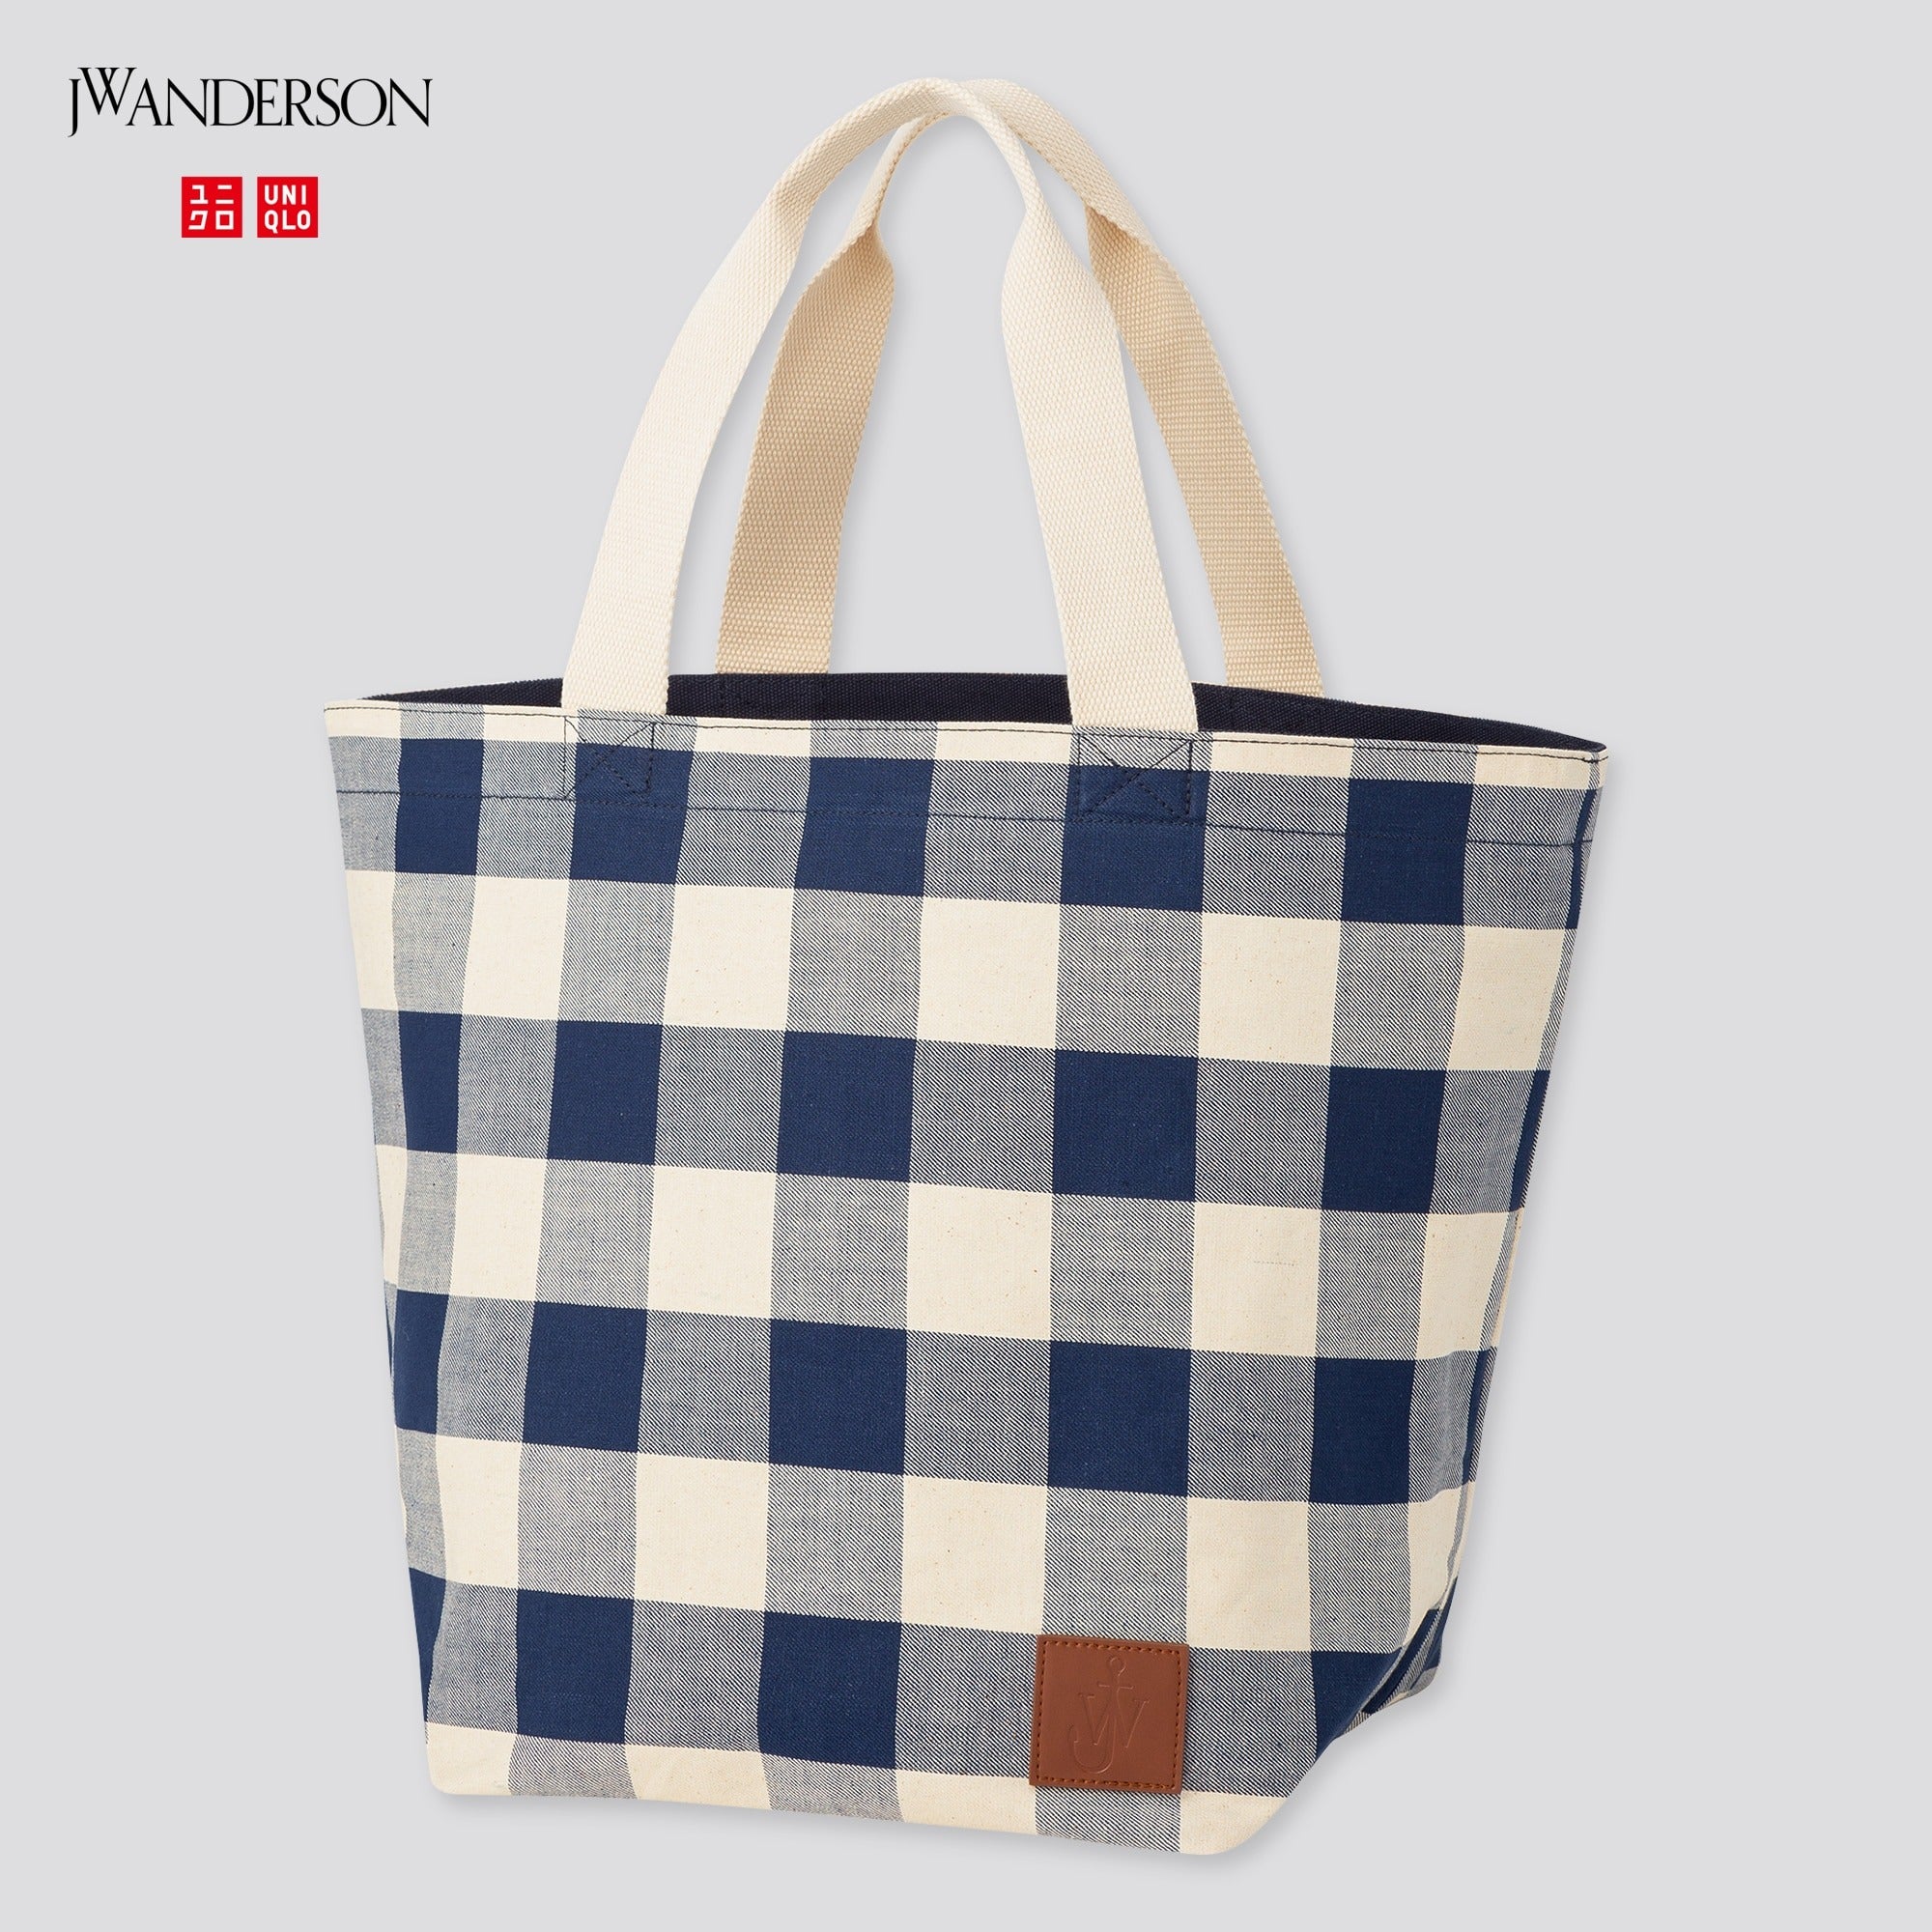 Uniqlo JW Anderson backpack Mens Fashion Bags Backpacks on Carousell